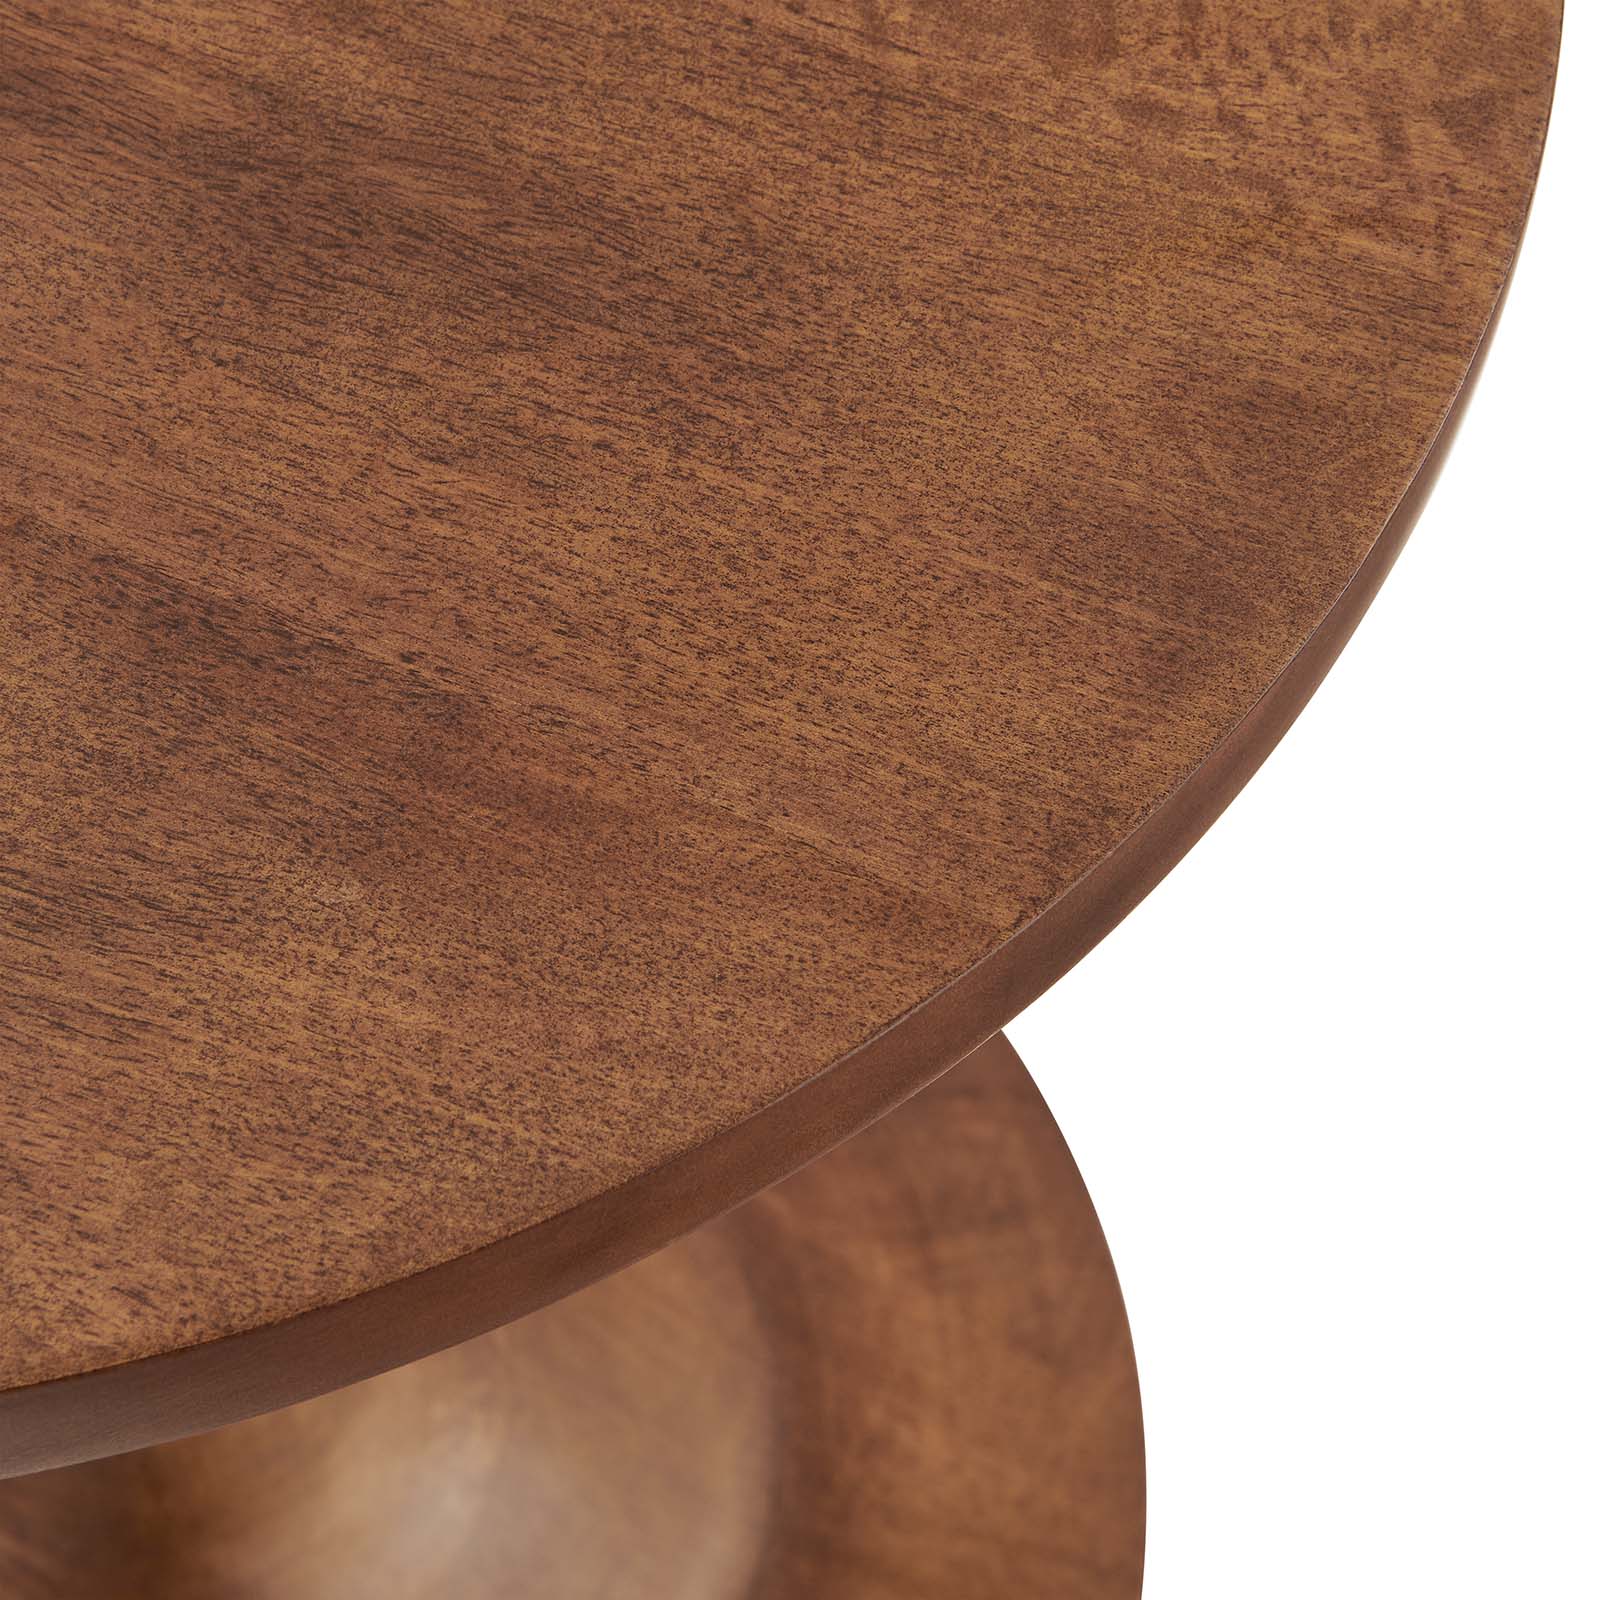 Lina Round Wood Side Table